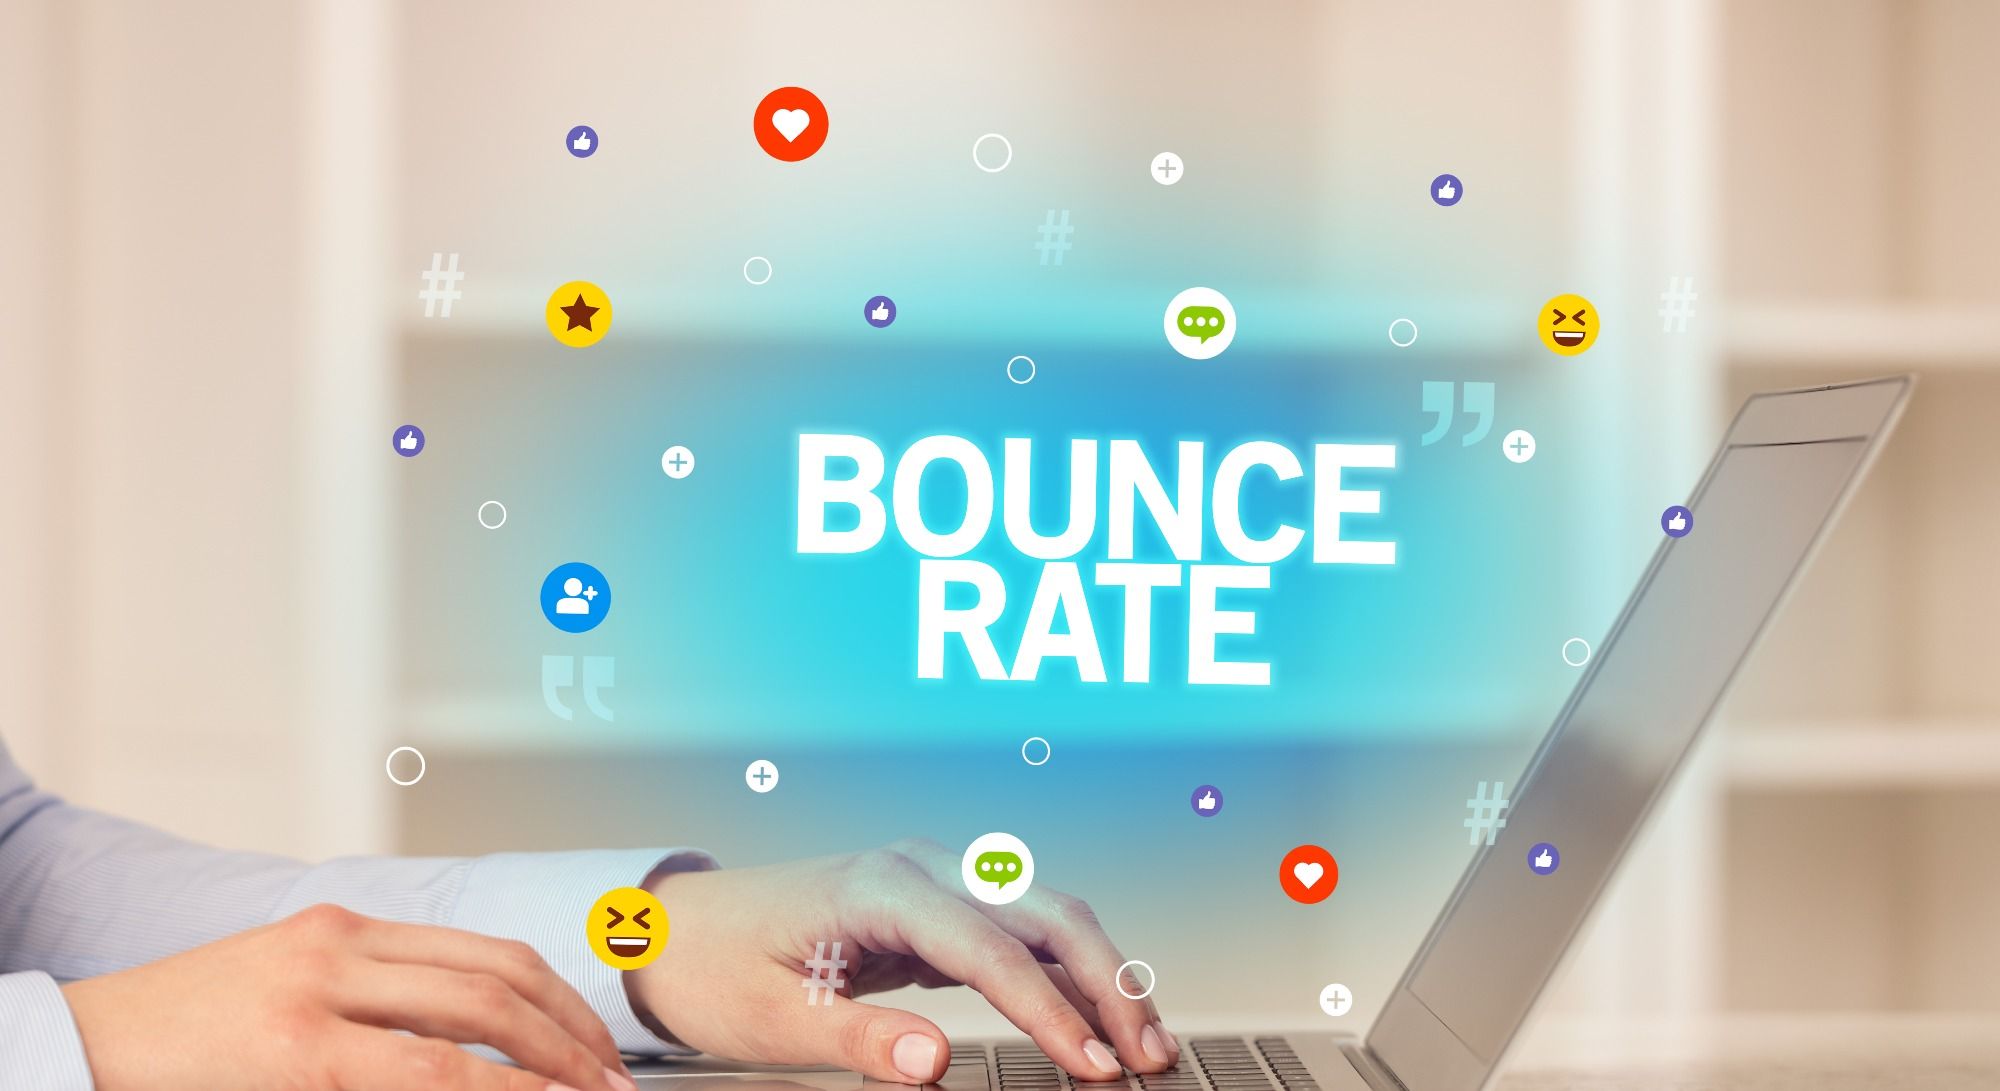 https://seoexpertpatrick.com/mydop-images/what-is-a-good-bounce-rate-in-2021.webp